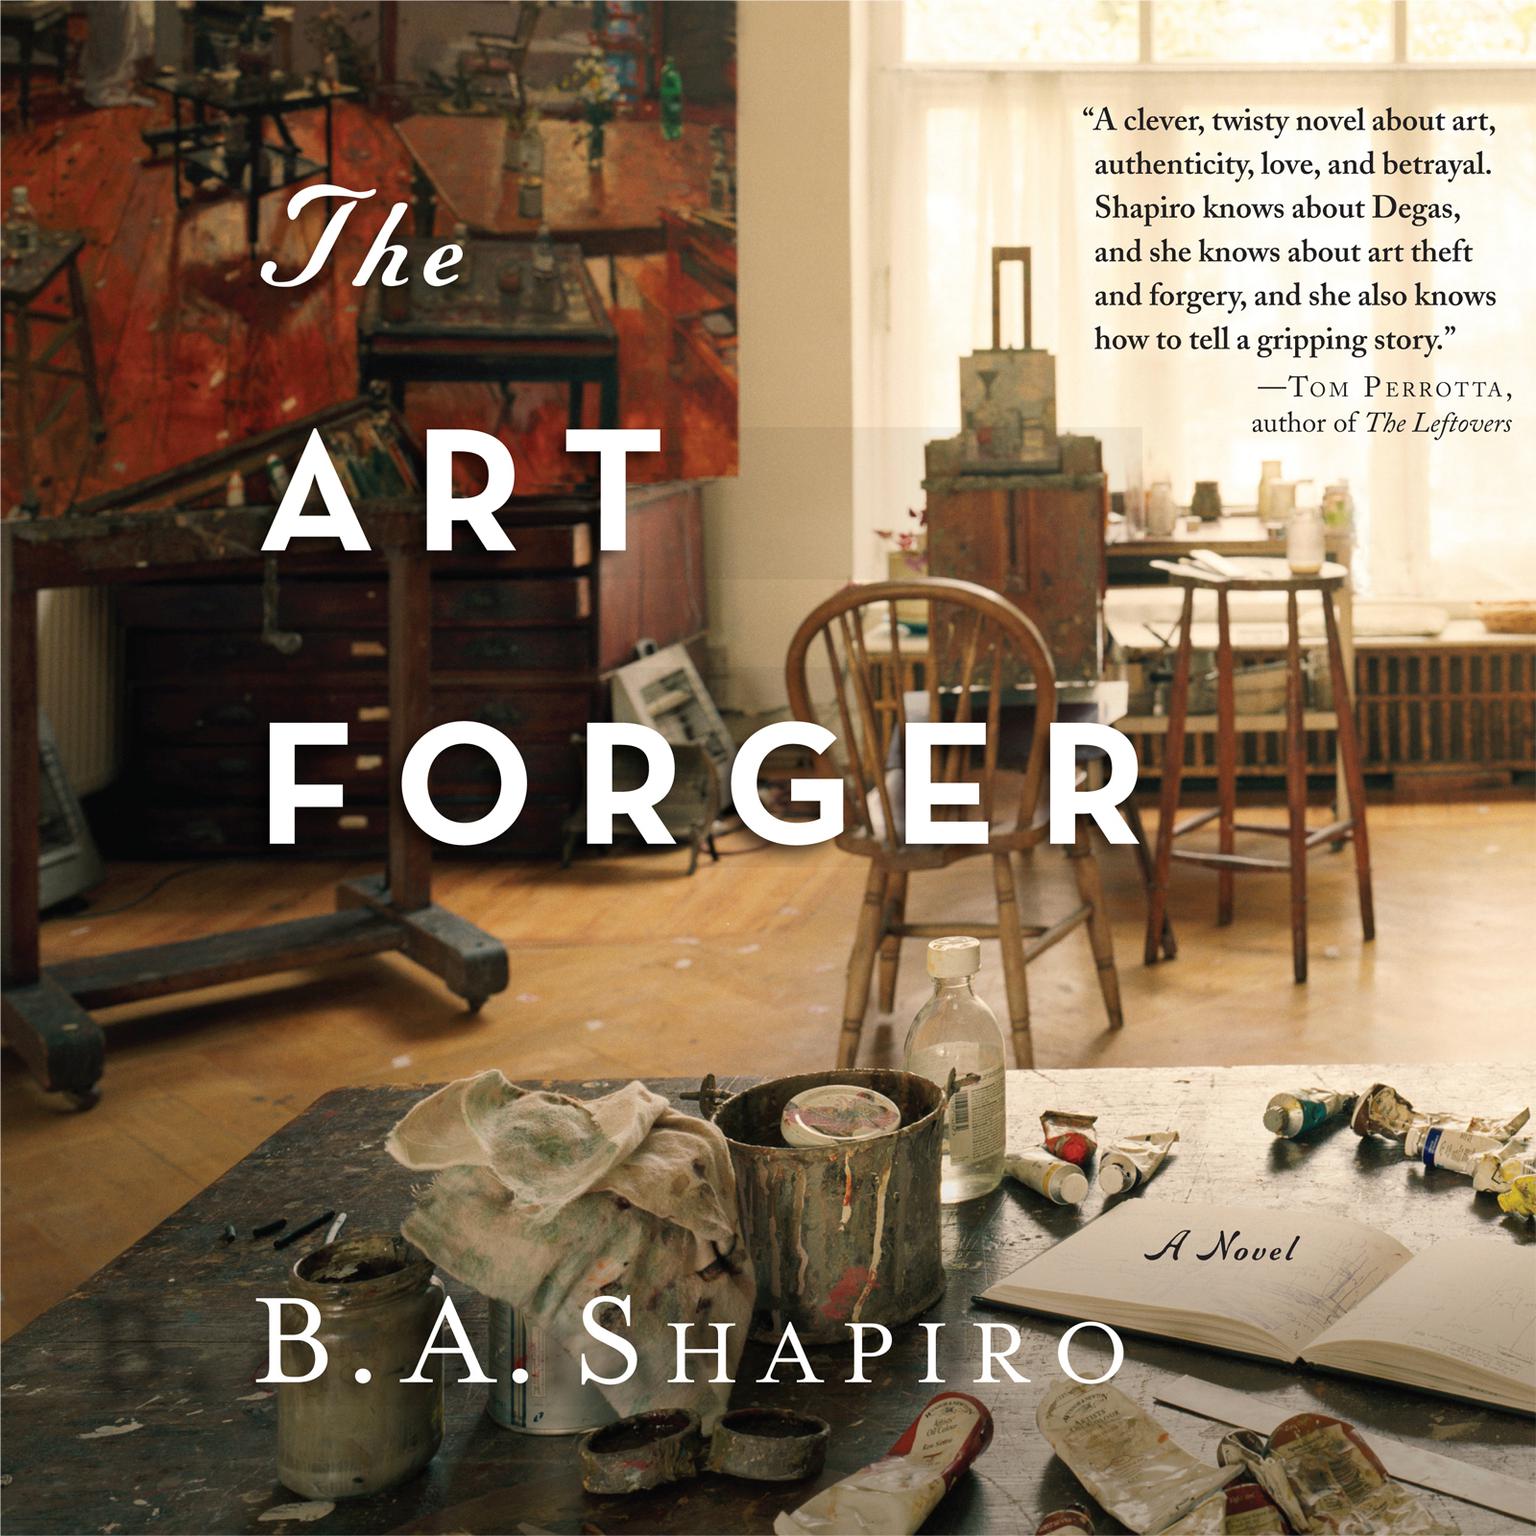 The Art Forger Audiobook, by B. A. Shapiro